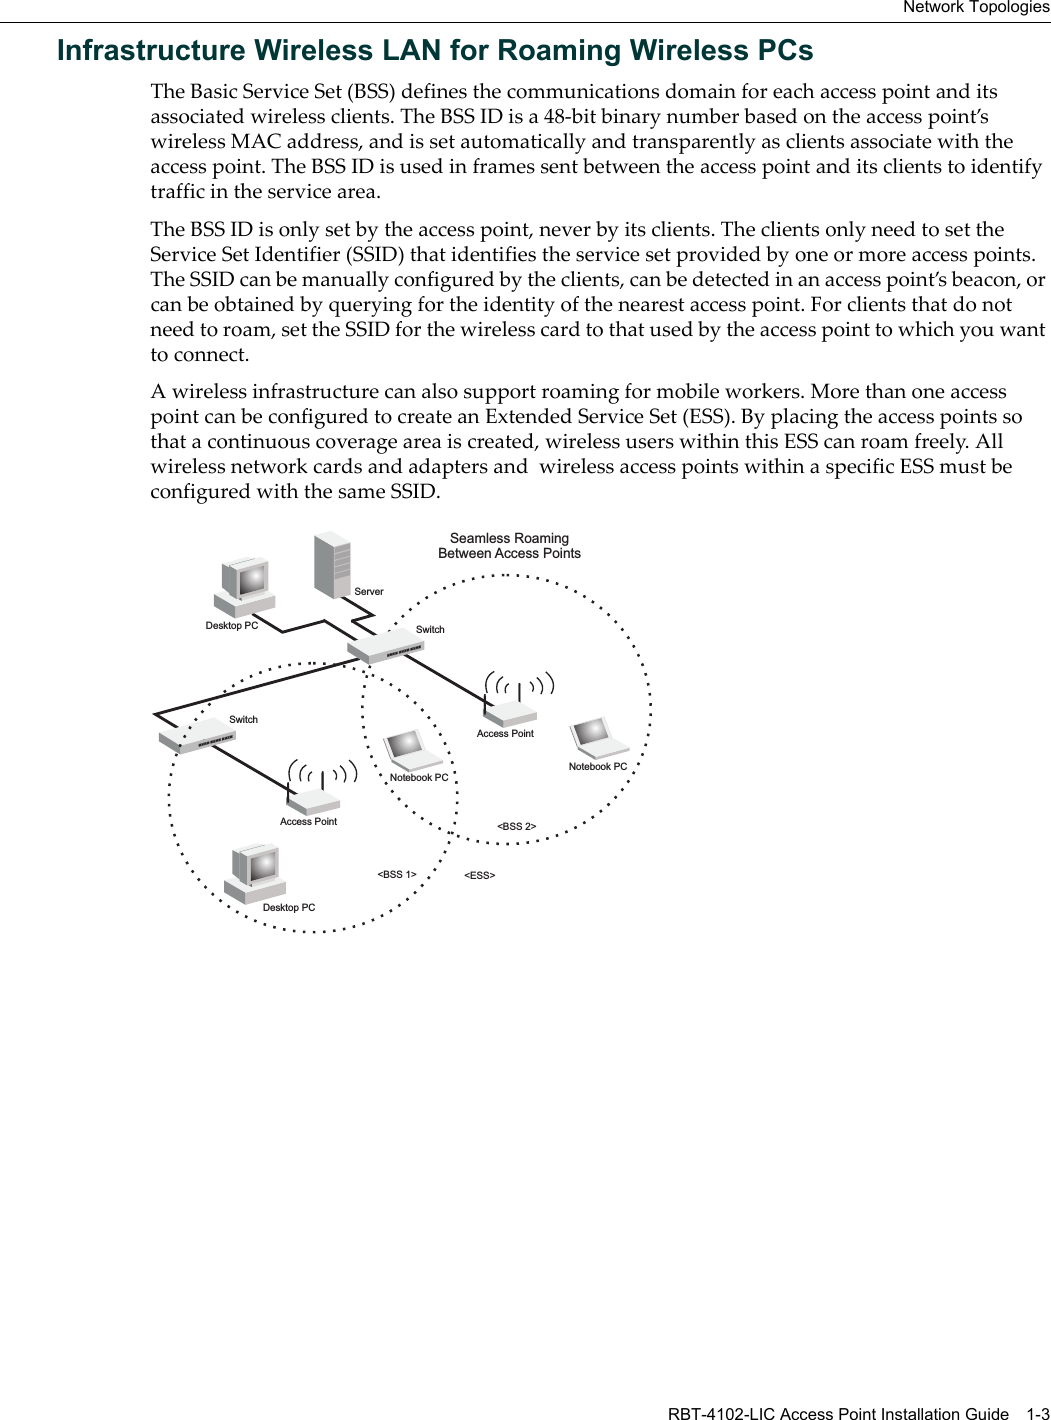 Network Topologies RBT-4102-LIC Access Point Installation Guide 1-3Infrastructure Wireless LAN for Roaming Wireless PCsTheBasicServiceSet(BSS)definesthecommunicationsdomainforeachaccesspointanditsassociatedwirelessclients.TheBSSIDisa48‐bitbinarynumberbasedontheaccesspoint’swirelessMACaddress,andissetautomaticallyandtransparentlyasclientsassociatewiththeaccesspoint.TheBSSIDisusedinframessentbetweentheaccesspointanditsclientstoidentifytrafficintheservicearea.TheBSSIDisonlysetbytheaccesspoint,neverbyitsclients.TheclientsonlyneedtosettheServiceSetIdentifier(SSID)thatidentifiestheservicesetprovidedbyoneormoreaccesspoints.TheSSIDcanbemanuallyconfiguredbytheclients,canbedetectedinanaccesspoint’sbeacon,orcanbeobtainedbyqueryingfortheidentityofthenearestaccesspoint.Forclientsthatdonotneedtoroam,settheSSIDforthewirelesscardtothatusedbytheaccesspointtowhichyouwanttoconnect.Awirelessinfrastructurecanalsosupportroamingformobileworkers.MorethanoneaccesspointcanbeconfiguredtocreateanExtendedServiceSet(ESS).Byplacingtheaccesspointssothatacontinuouscoverageareaiscreated,wirelessuserswithinthisESScanroamfreely.AllwirelessnetworkcardsandadaptersandwirelessaccesspointswithinaspecificESSmustbeconfiguredwiththesameSSID.&lt;BSS 2&gt;&lt;ESS&gt;&lt;BSS 1&gt;ServerSwitchDesktop PCAccess PointSeamless RoamingBetween Access PointsDesktop PCNotebook PCAccess PointNotebook PCSwitch